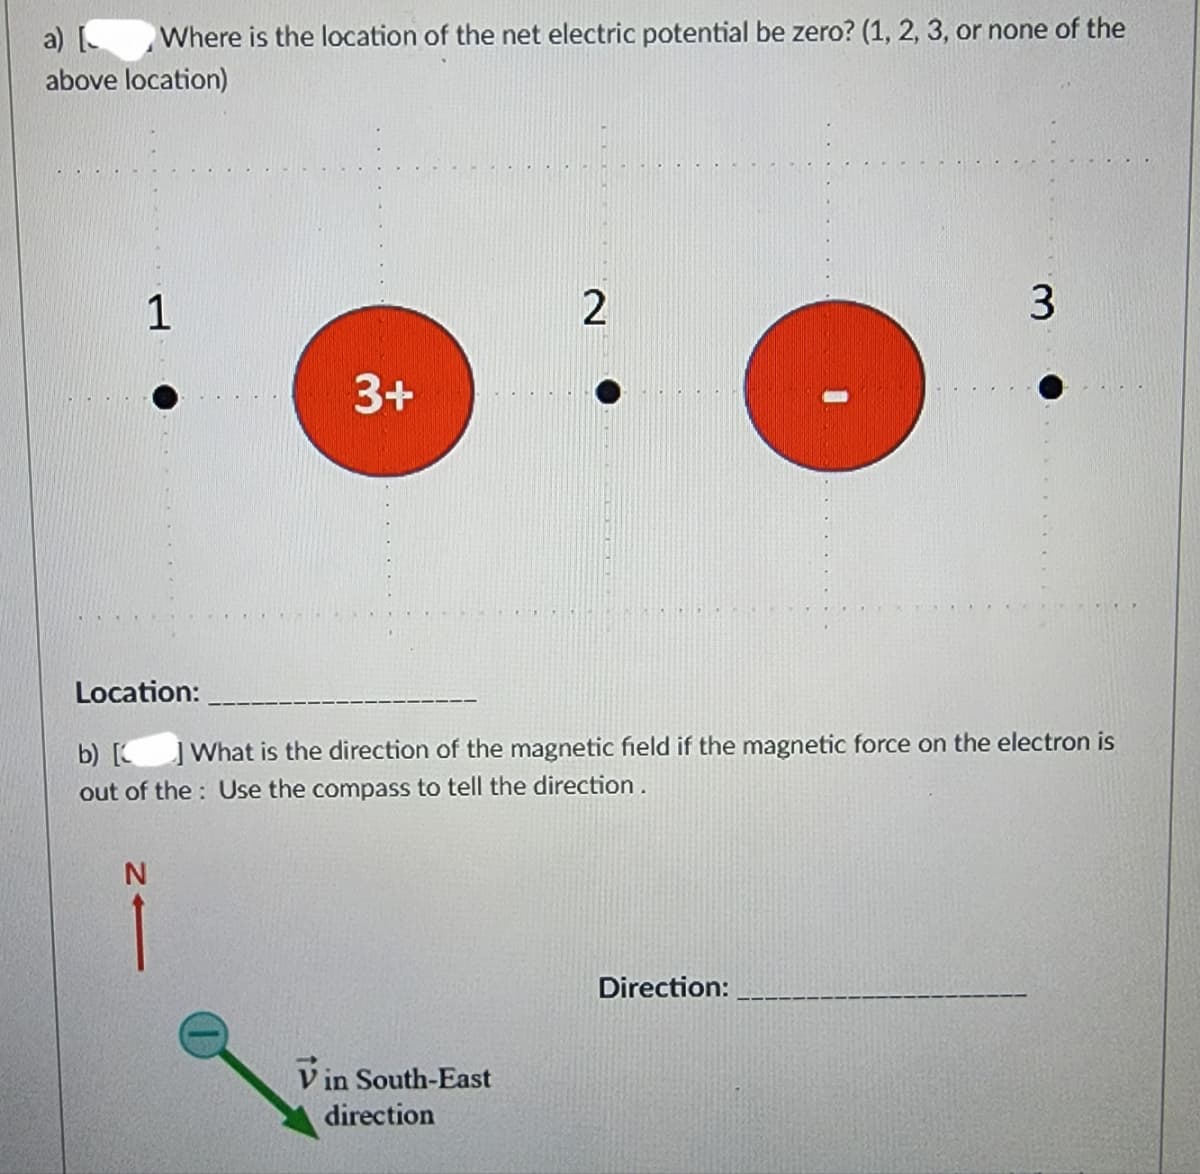 a) [
Where is the location of the net electric potential be zero? (1, 2, 3, or none of the
above location)
1
3+
N
2
Location:
b) [
] What is the direction of the magnetic field if the magnetic force on the electron is
out of the Use the compass to tell the direction.
Vin South-East
direction
3
Direction: